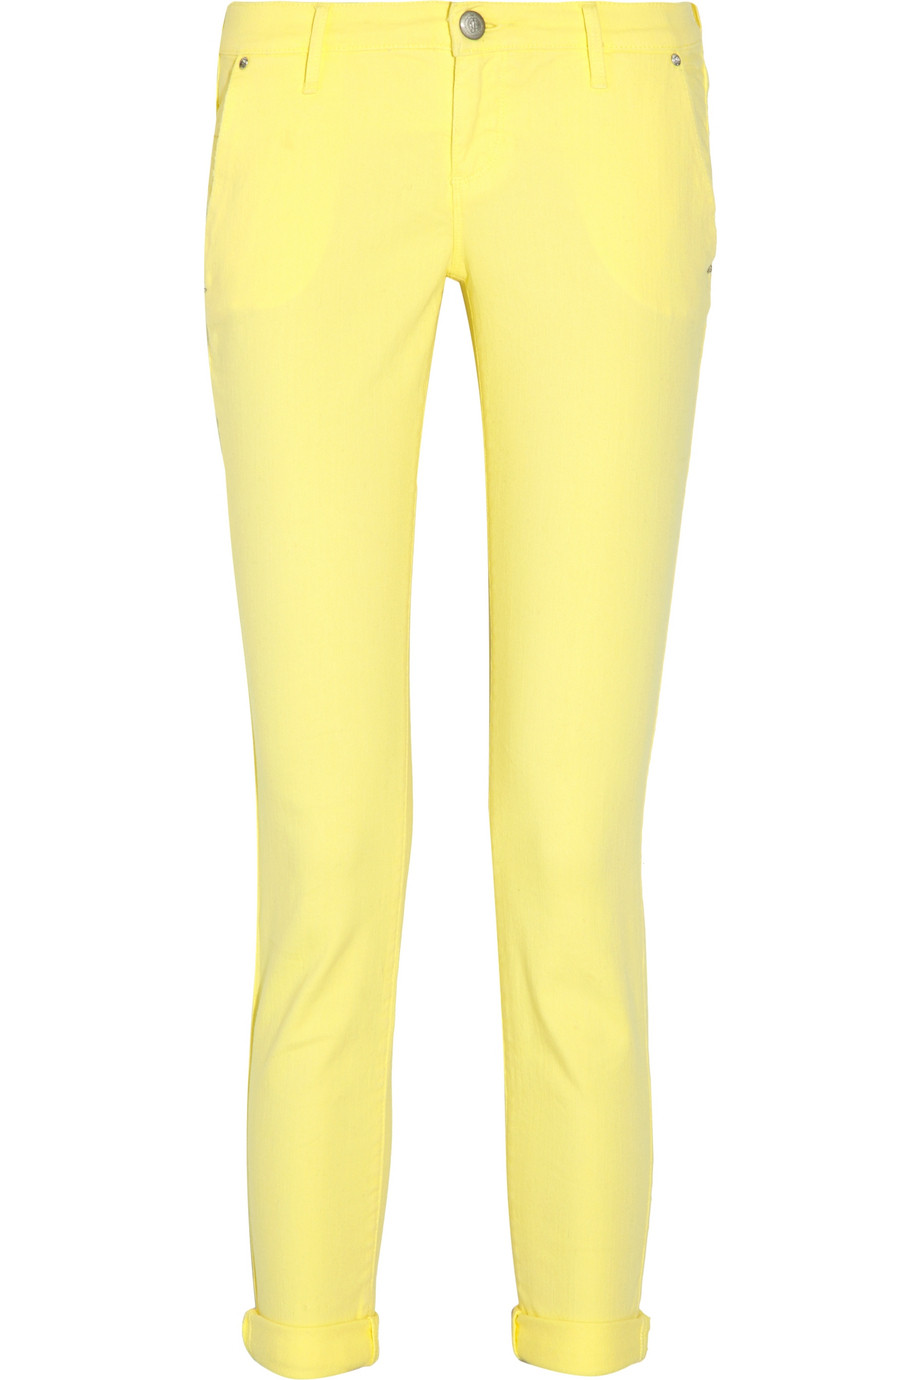 Juicy Couture Cropped Low-rise Skinny Jeans in Yellow (lemon) | Lyst